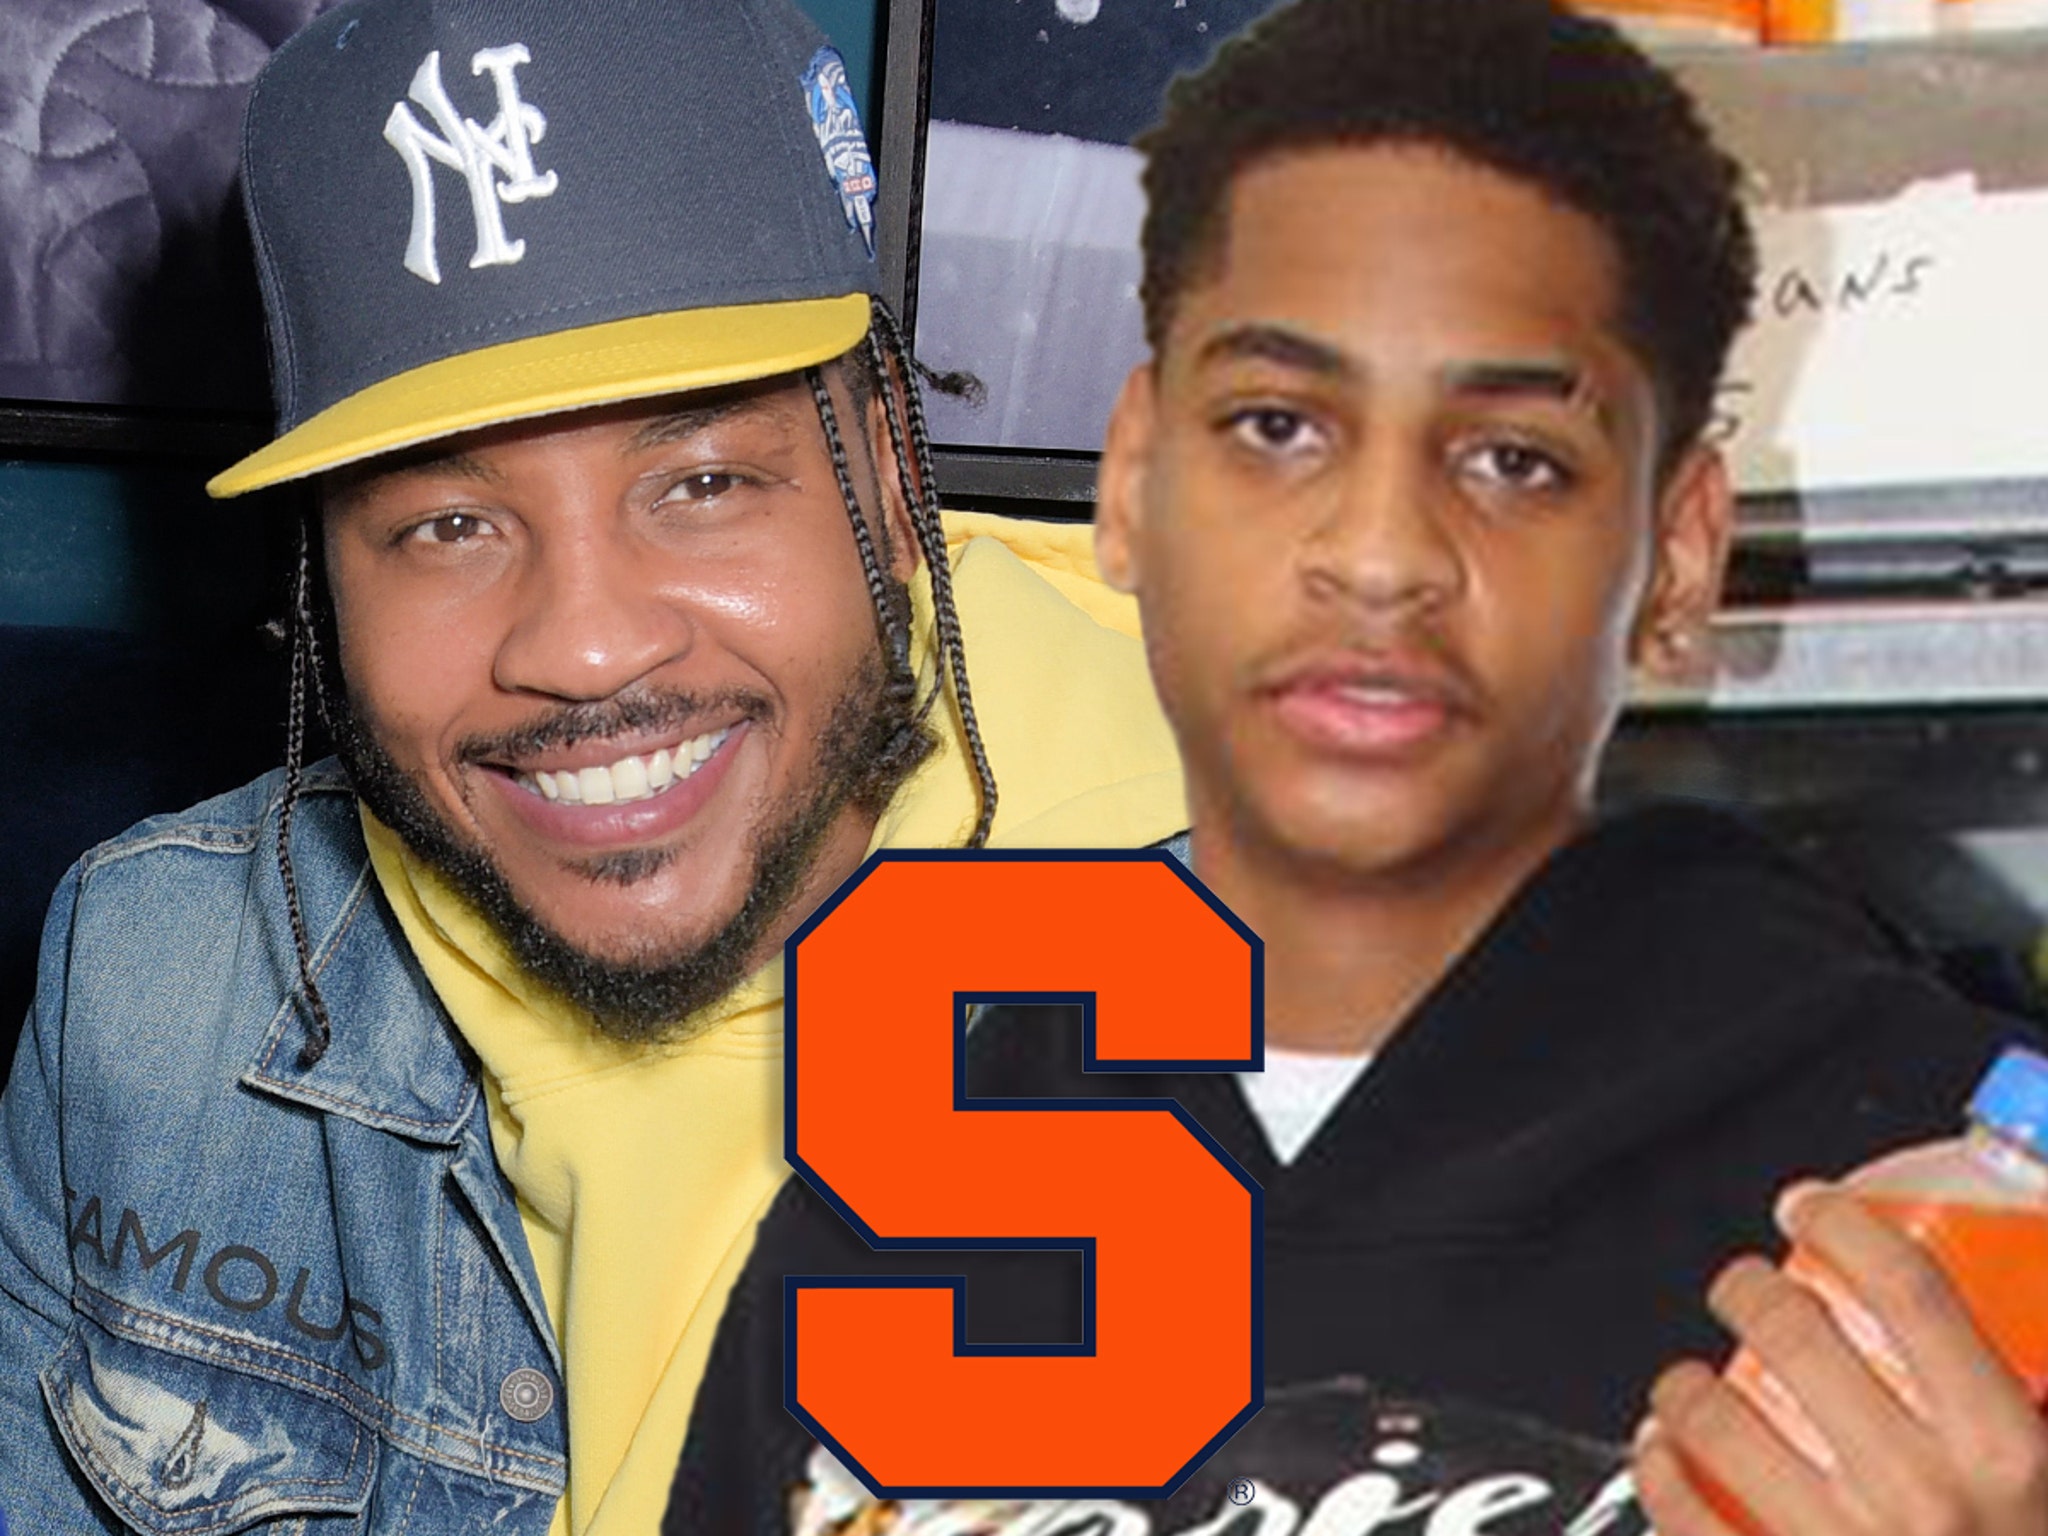 Syracuse basketball has interest in Carmelo Anthony's son, a 4